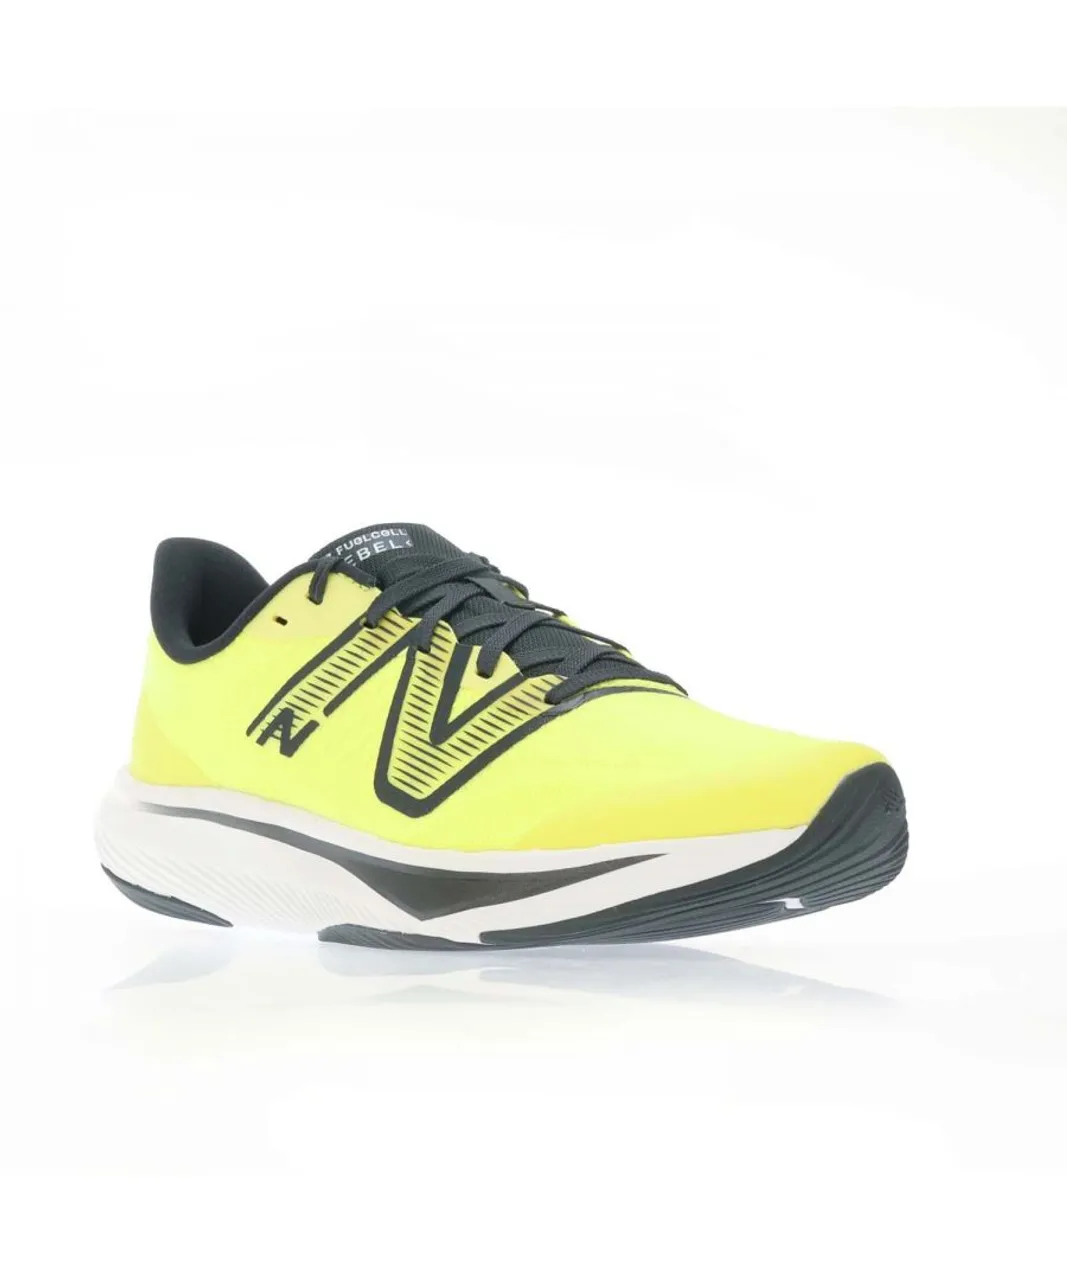 New Balance Boys Boy's Kids FuelCell Rebel v3 Running Shoes in Yellow